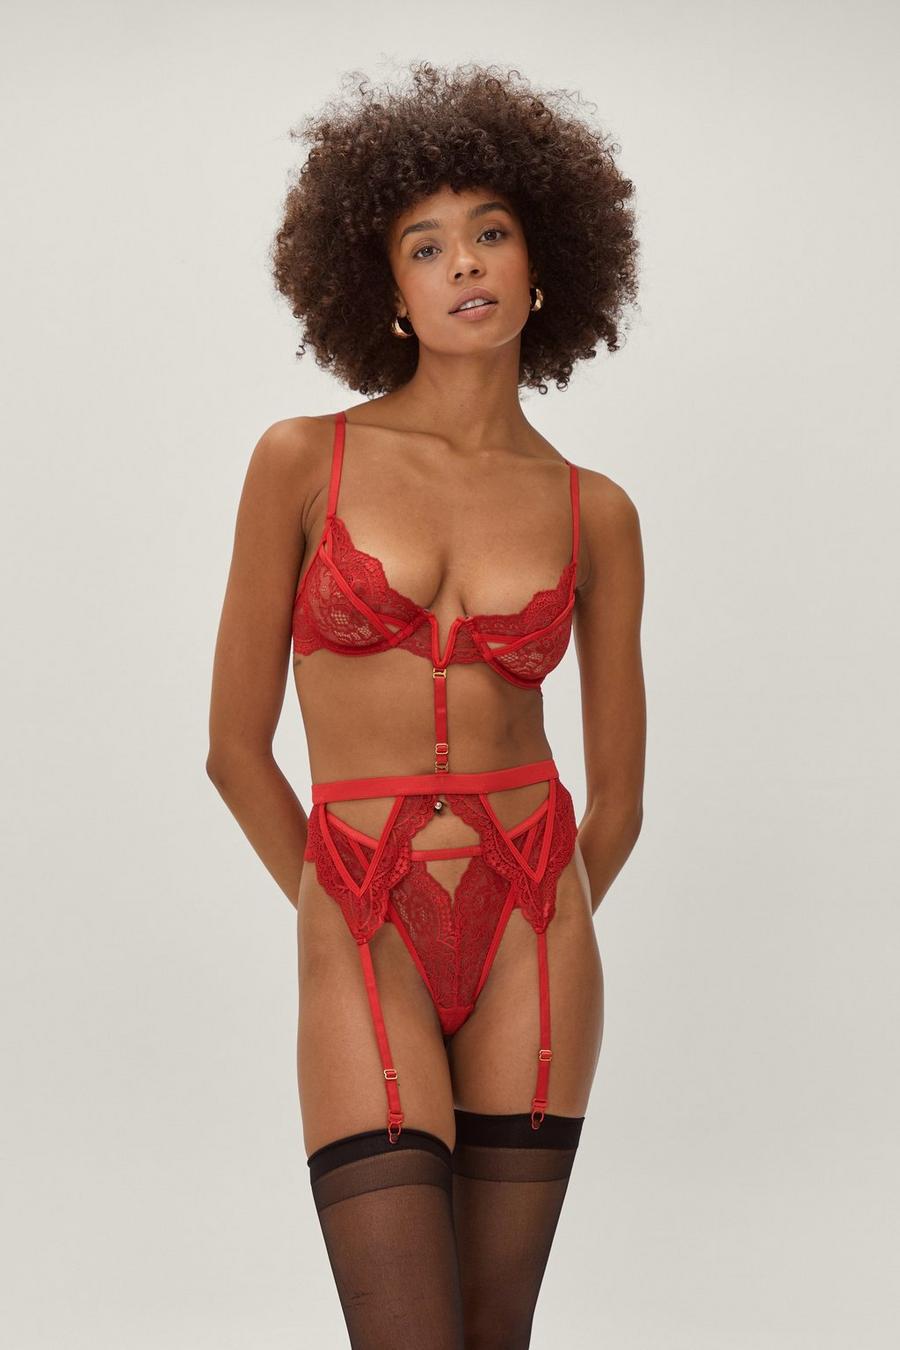 Lace Suspender and Underwired Bra 3pc Lingerie Set